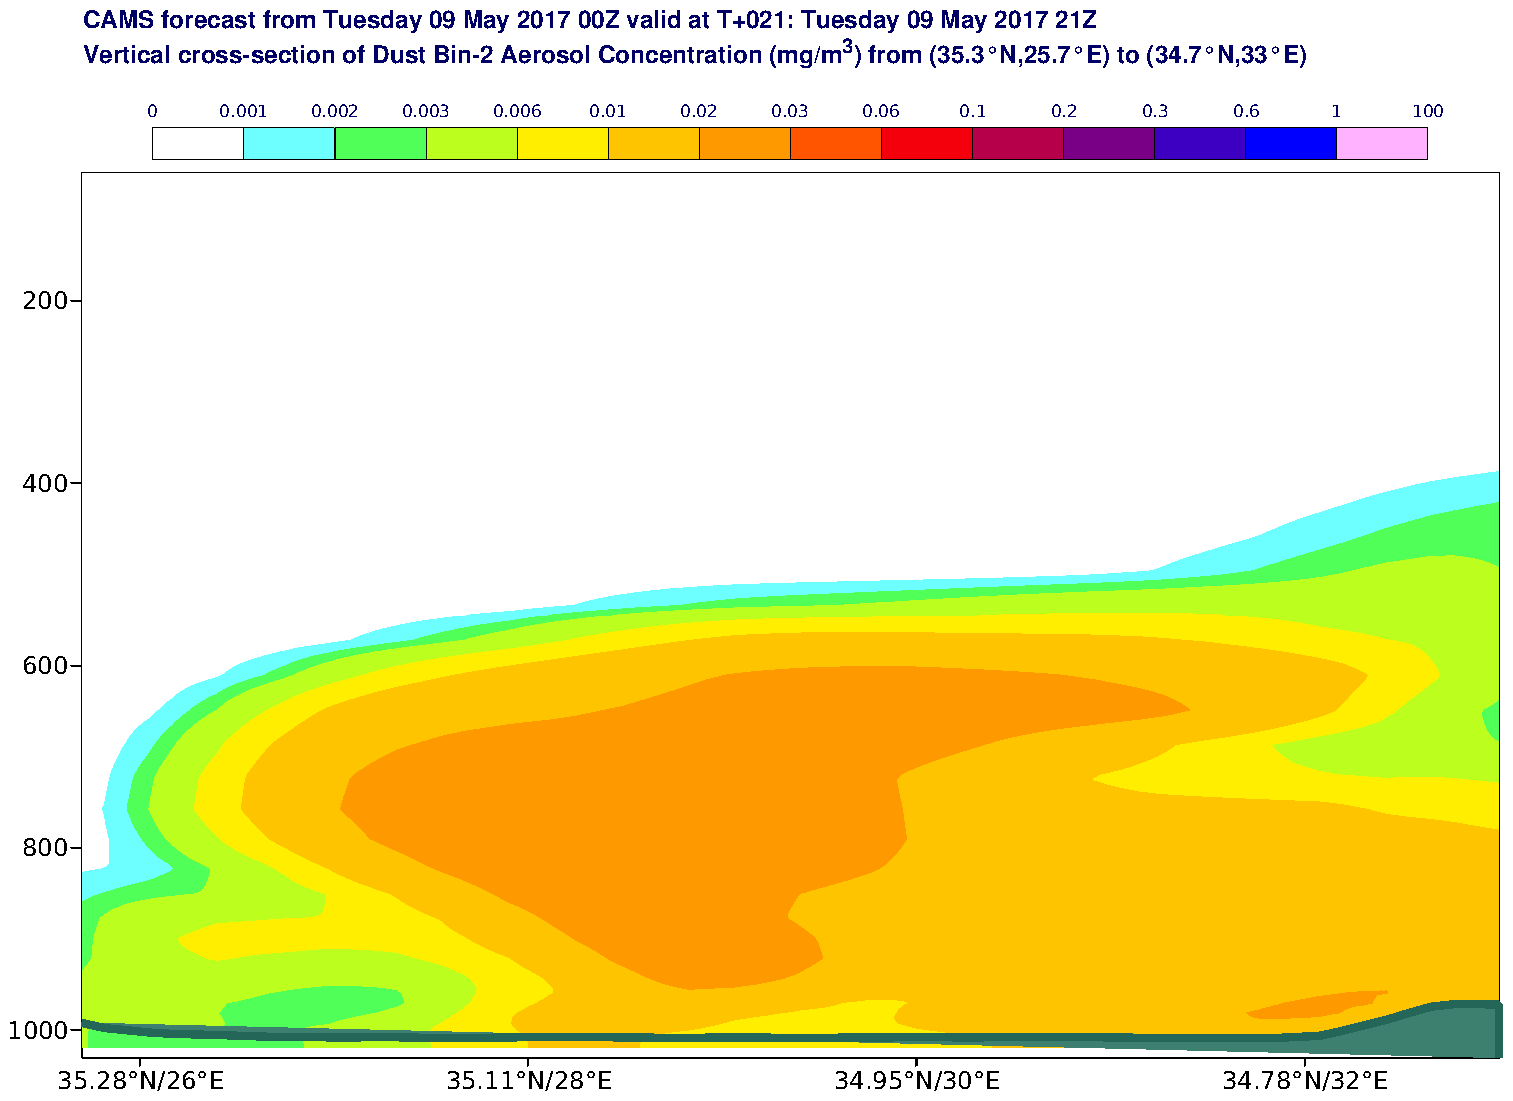 Vertical cross-section of Dust Bin-2 Aerosol Concentration (mg/m3) valid at T21 - 2017-05-09 21:00